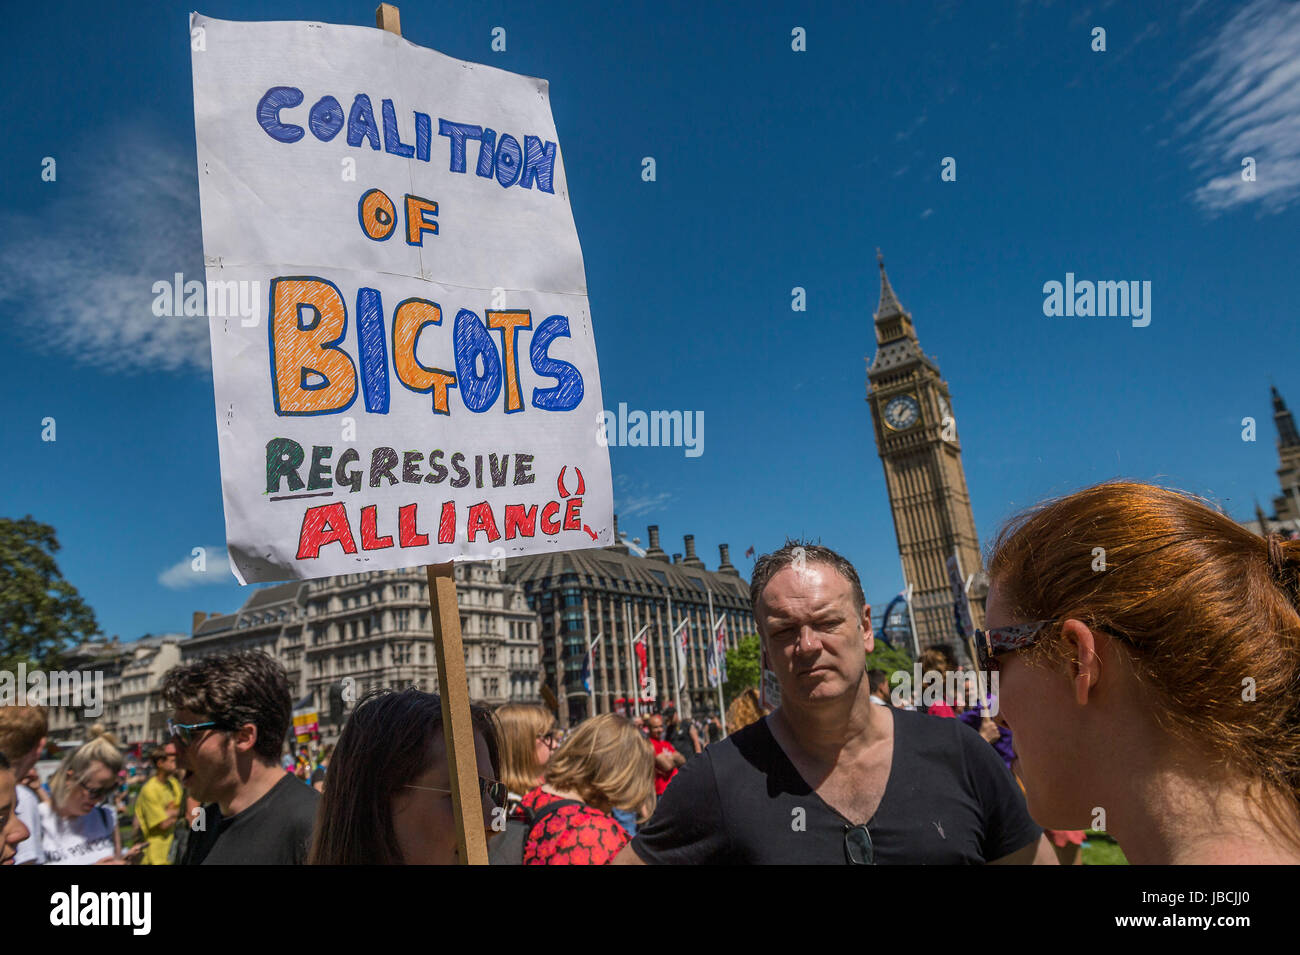 London, UK. 10th June, 2017. Coalition of bigots - A day after the election result protestors gather to ask for Theresa May to quit and not do a deal with the DUP. Who people fear because of their views on abrtion, gay marriage etc. Westminster, London, 10 Jun 2017 Credit: Guy Bell/Alamy Live News Stock Photo